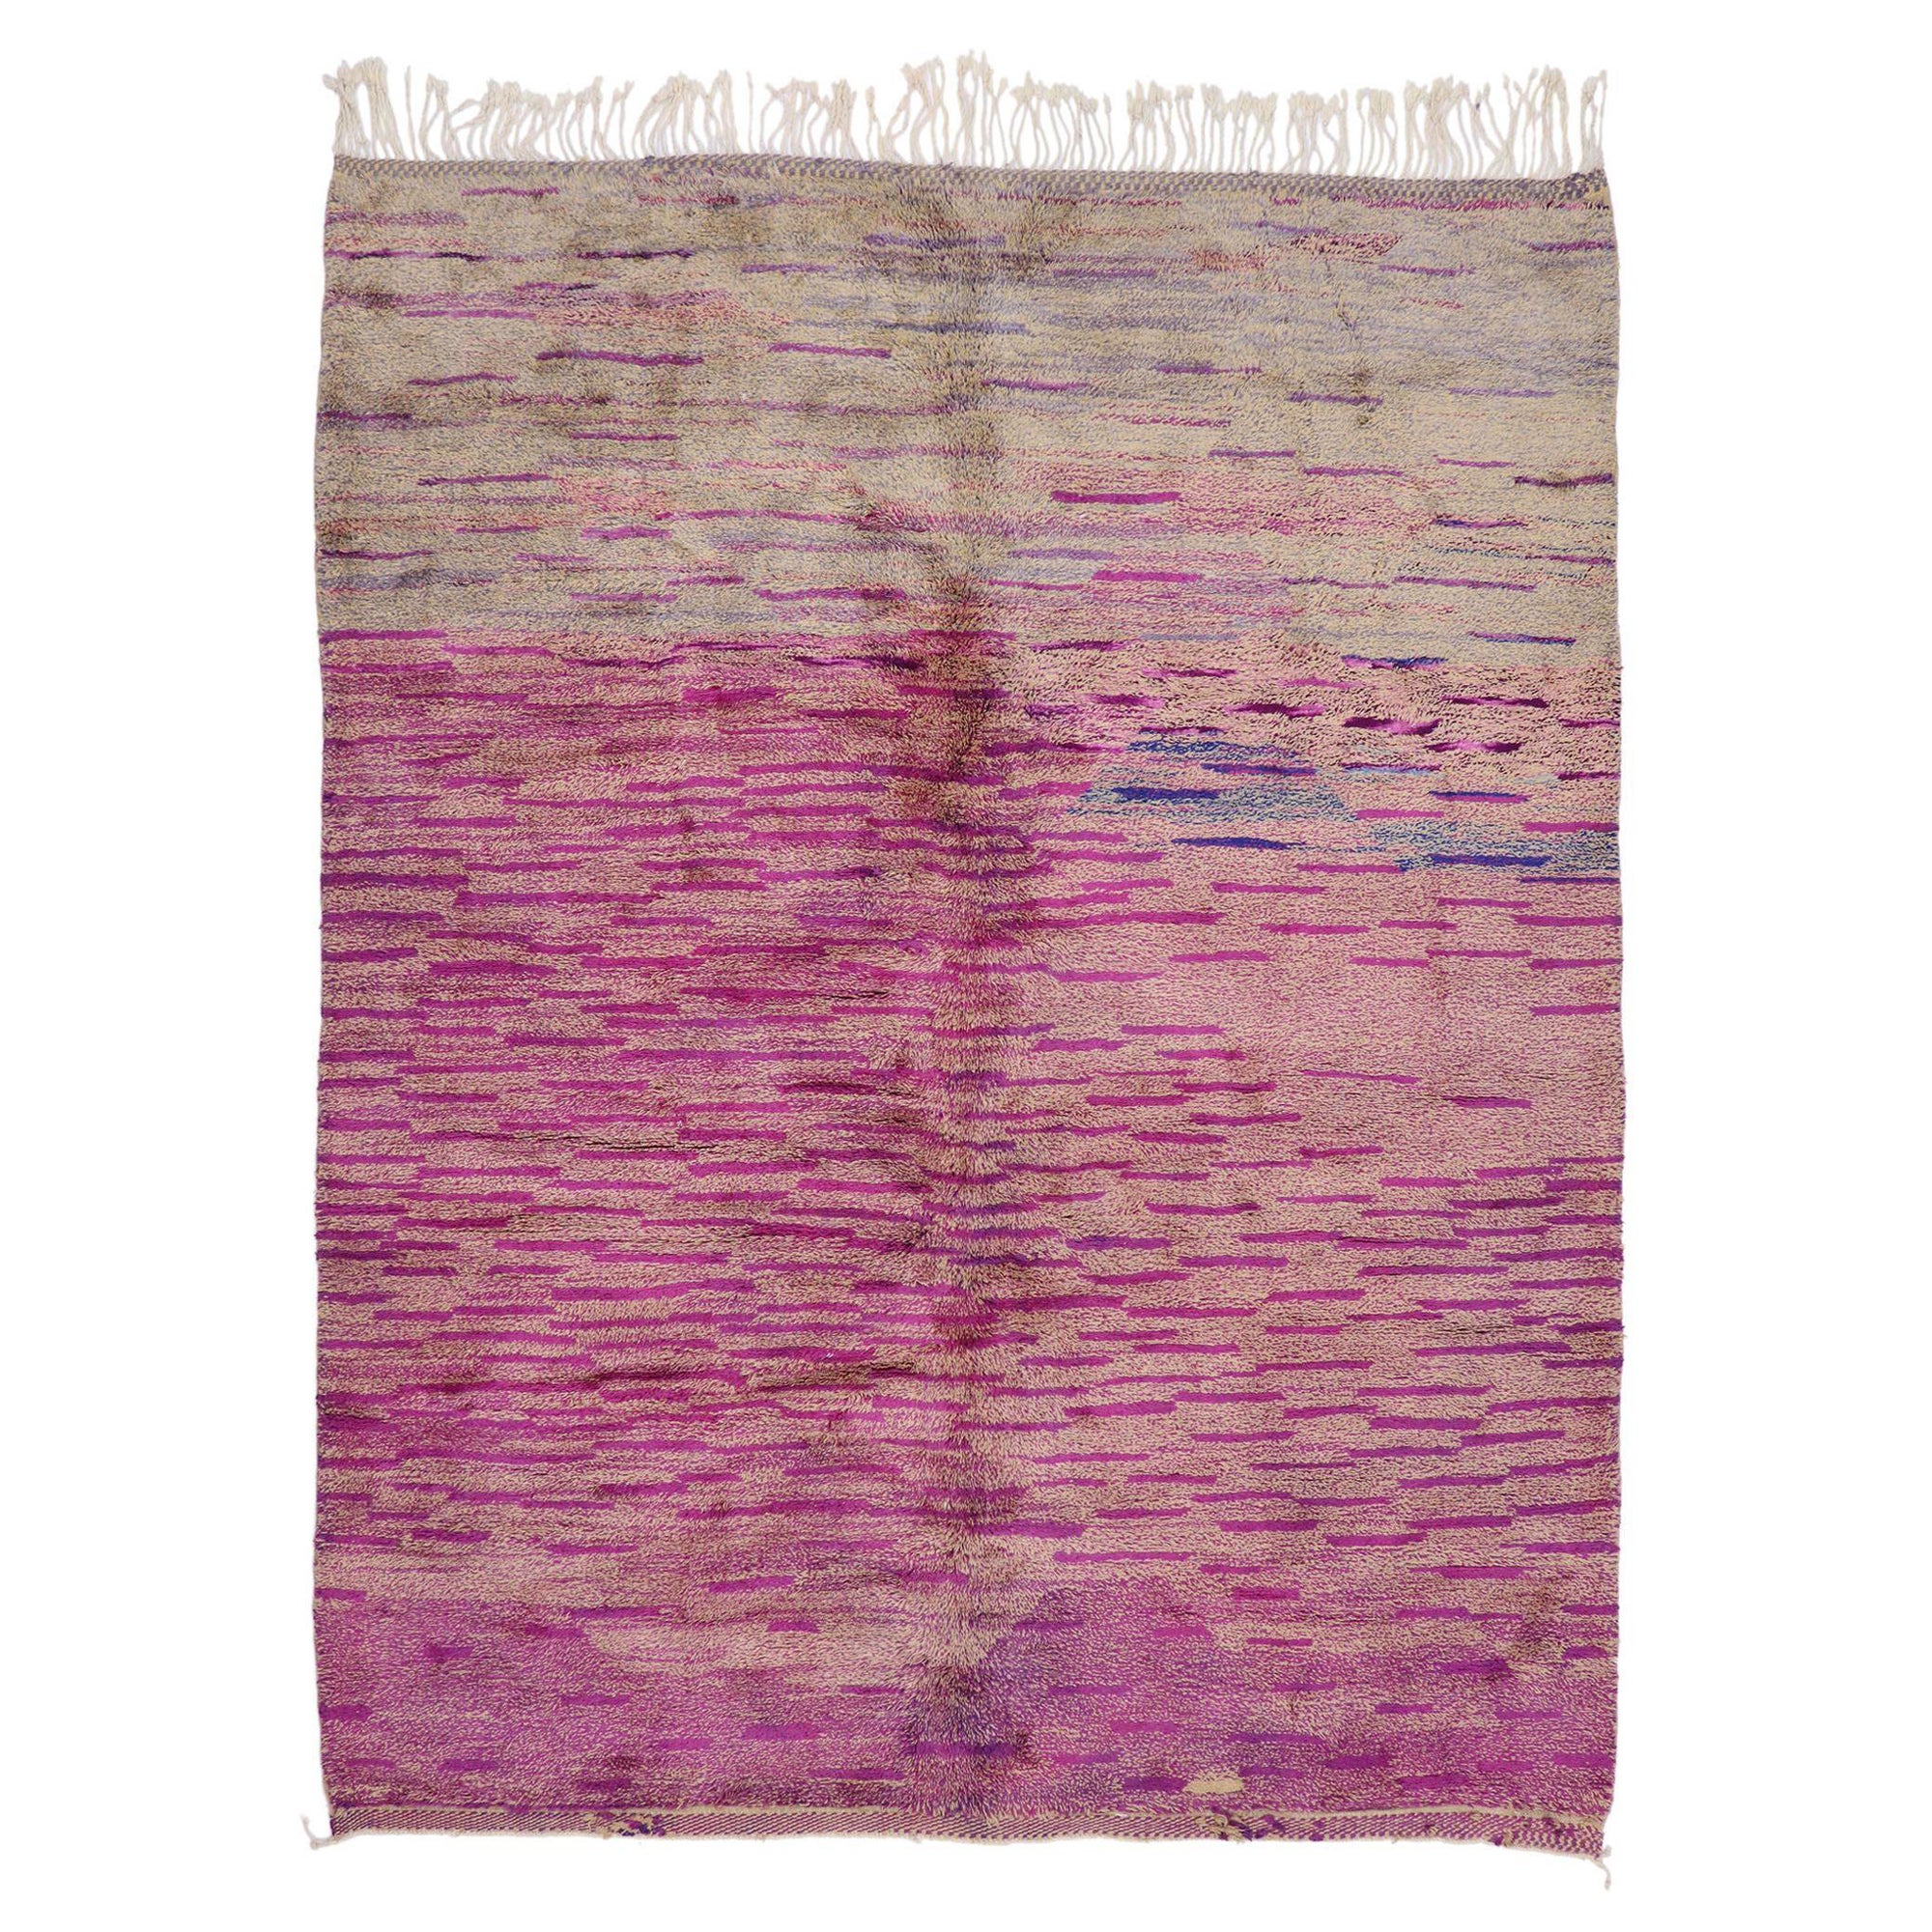 Large Pink Abstract Moroccan Rug, Bohemian Rhapsody Meets Abstract Expressionism